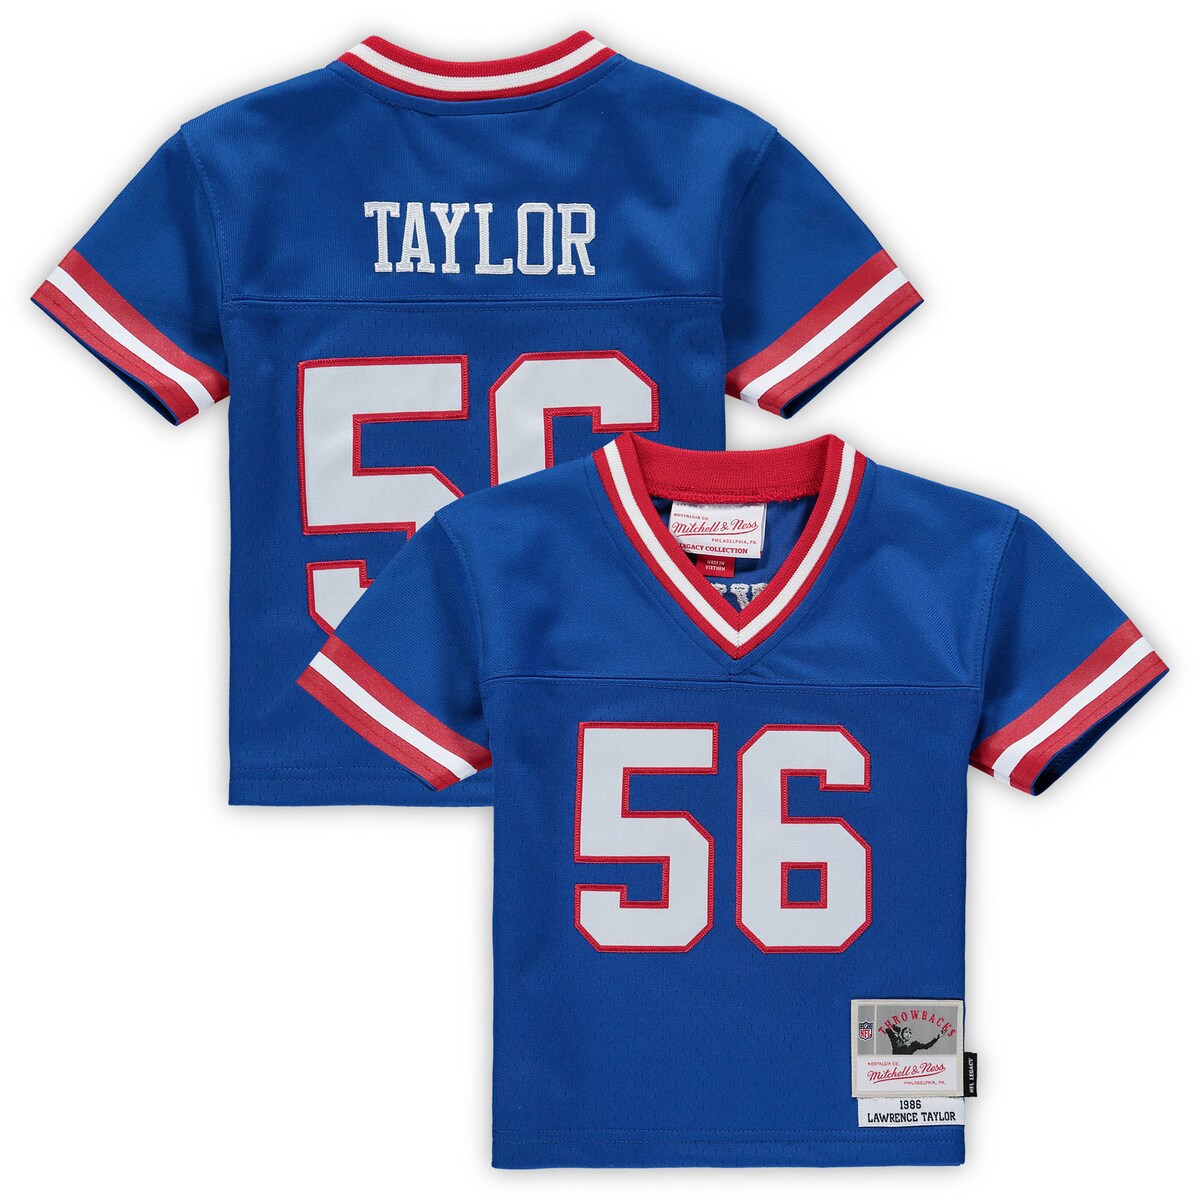 Welcome your new little New York Giants fan into the football family with this Lawrence Taylor 1986 Retired Legacy jersey from Mitchell & Ness. The soft, breathable mesh material provides a nice breeze to keep them cool. Finished with a sleek New York Giants design, this player jersey gives your MVP in the making a fresh new look.ImportedBrand: Mitchell & NessMachine wash with garment inside out, tumble dry lowOfficially licensedHeat-sealed stripesStitched tackle twill appliqueNFL patch sewn onto bottom front collarWoven tag at bottom left hemShort sleevesMaterial: 100% PolyesterBottom hem with side splitsSolid side panelsMesh fabric